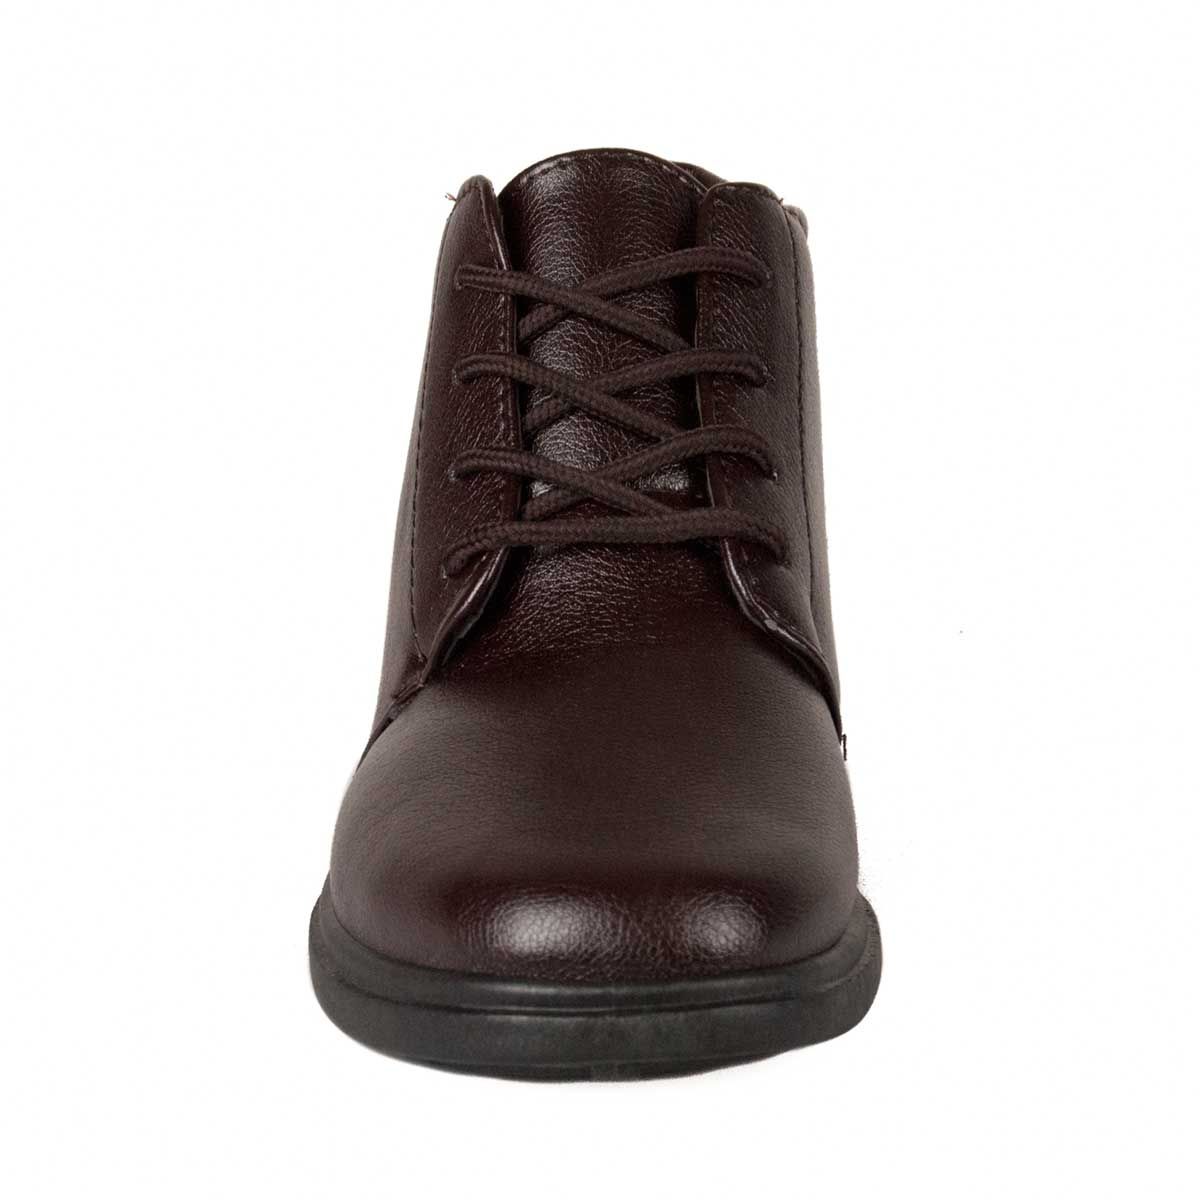 Comfortable and light boot for men with laces of thread, perfect for the day for its super flexible and perfectly adaptable to the foot. The ankle area is padded, to provide greater comfort. Its double seam gives the boot firmness and consistency. Interior area and plant coarse hair lined. Foreign material Very easy to clean. Light floor and anti-slip rubber sole.